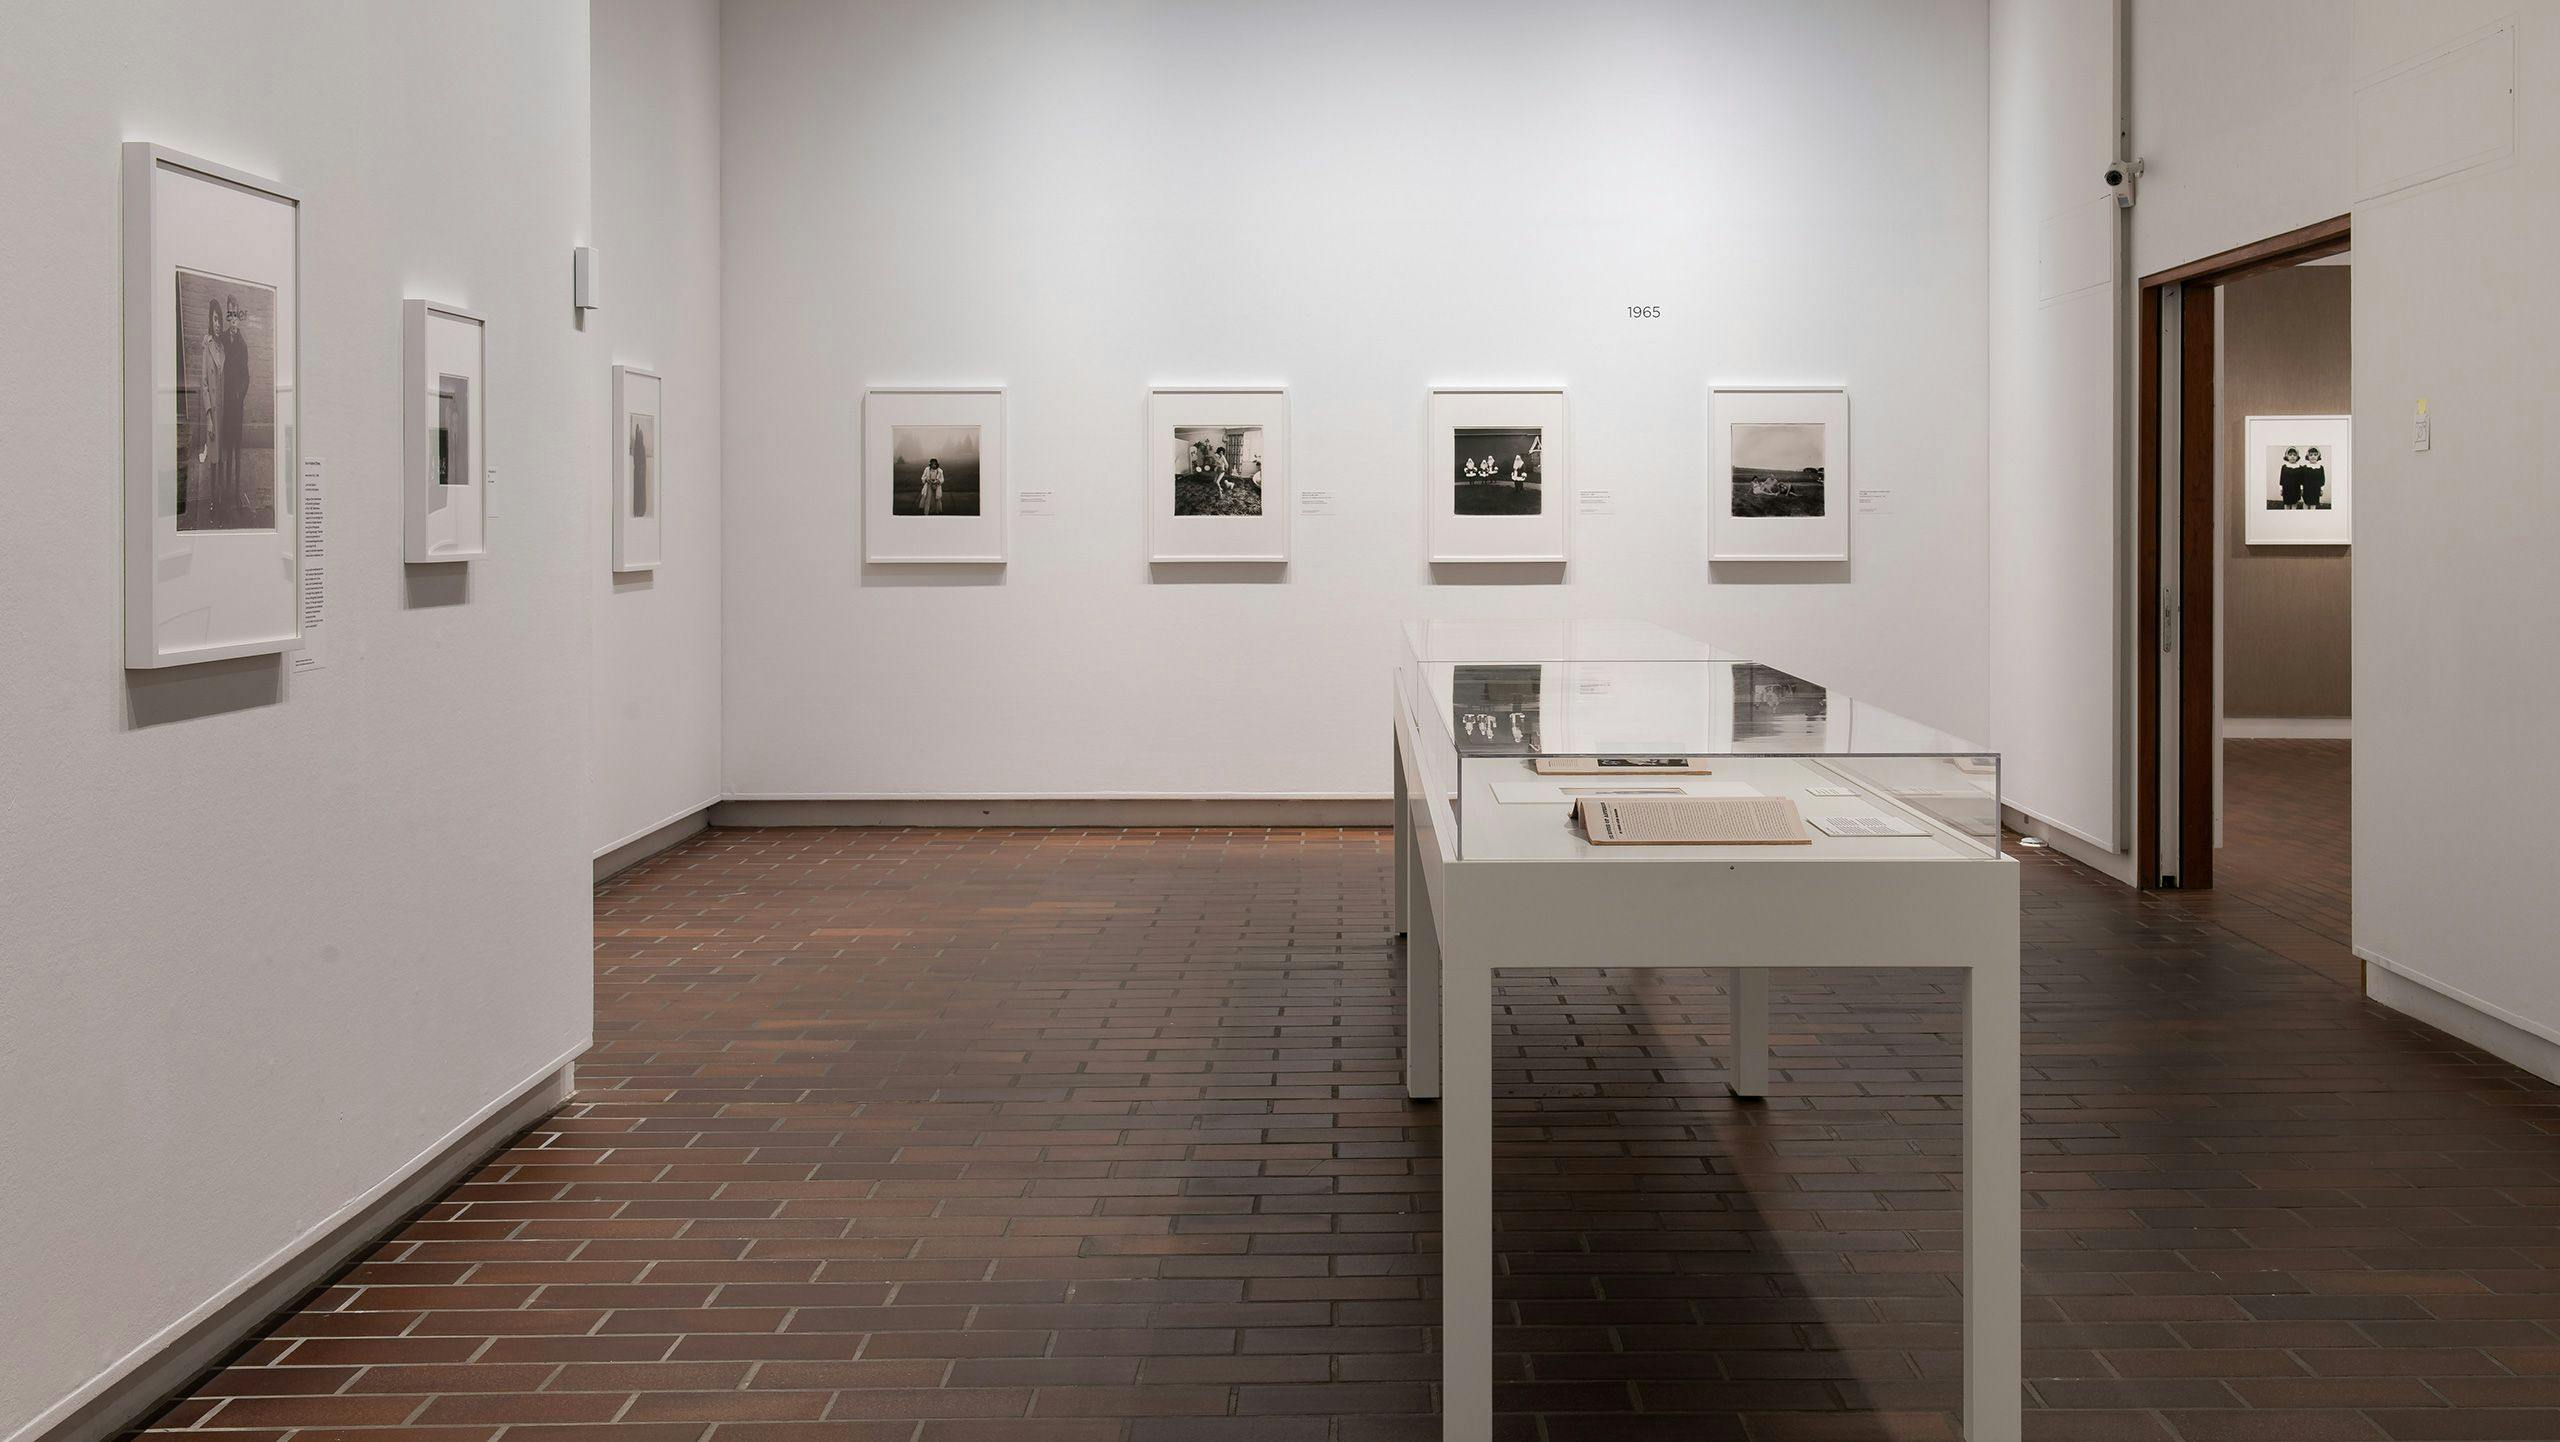 Installation view of the exhibition, Diane Arbus: Photographs, 1956–1971, at the Louisiana Museum of Modern Art in Humlebæk, Denmark, dated 2022.